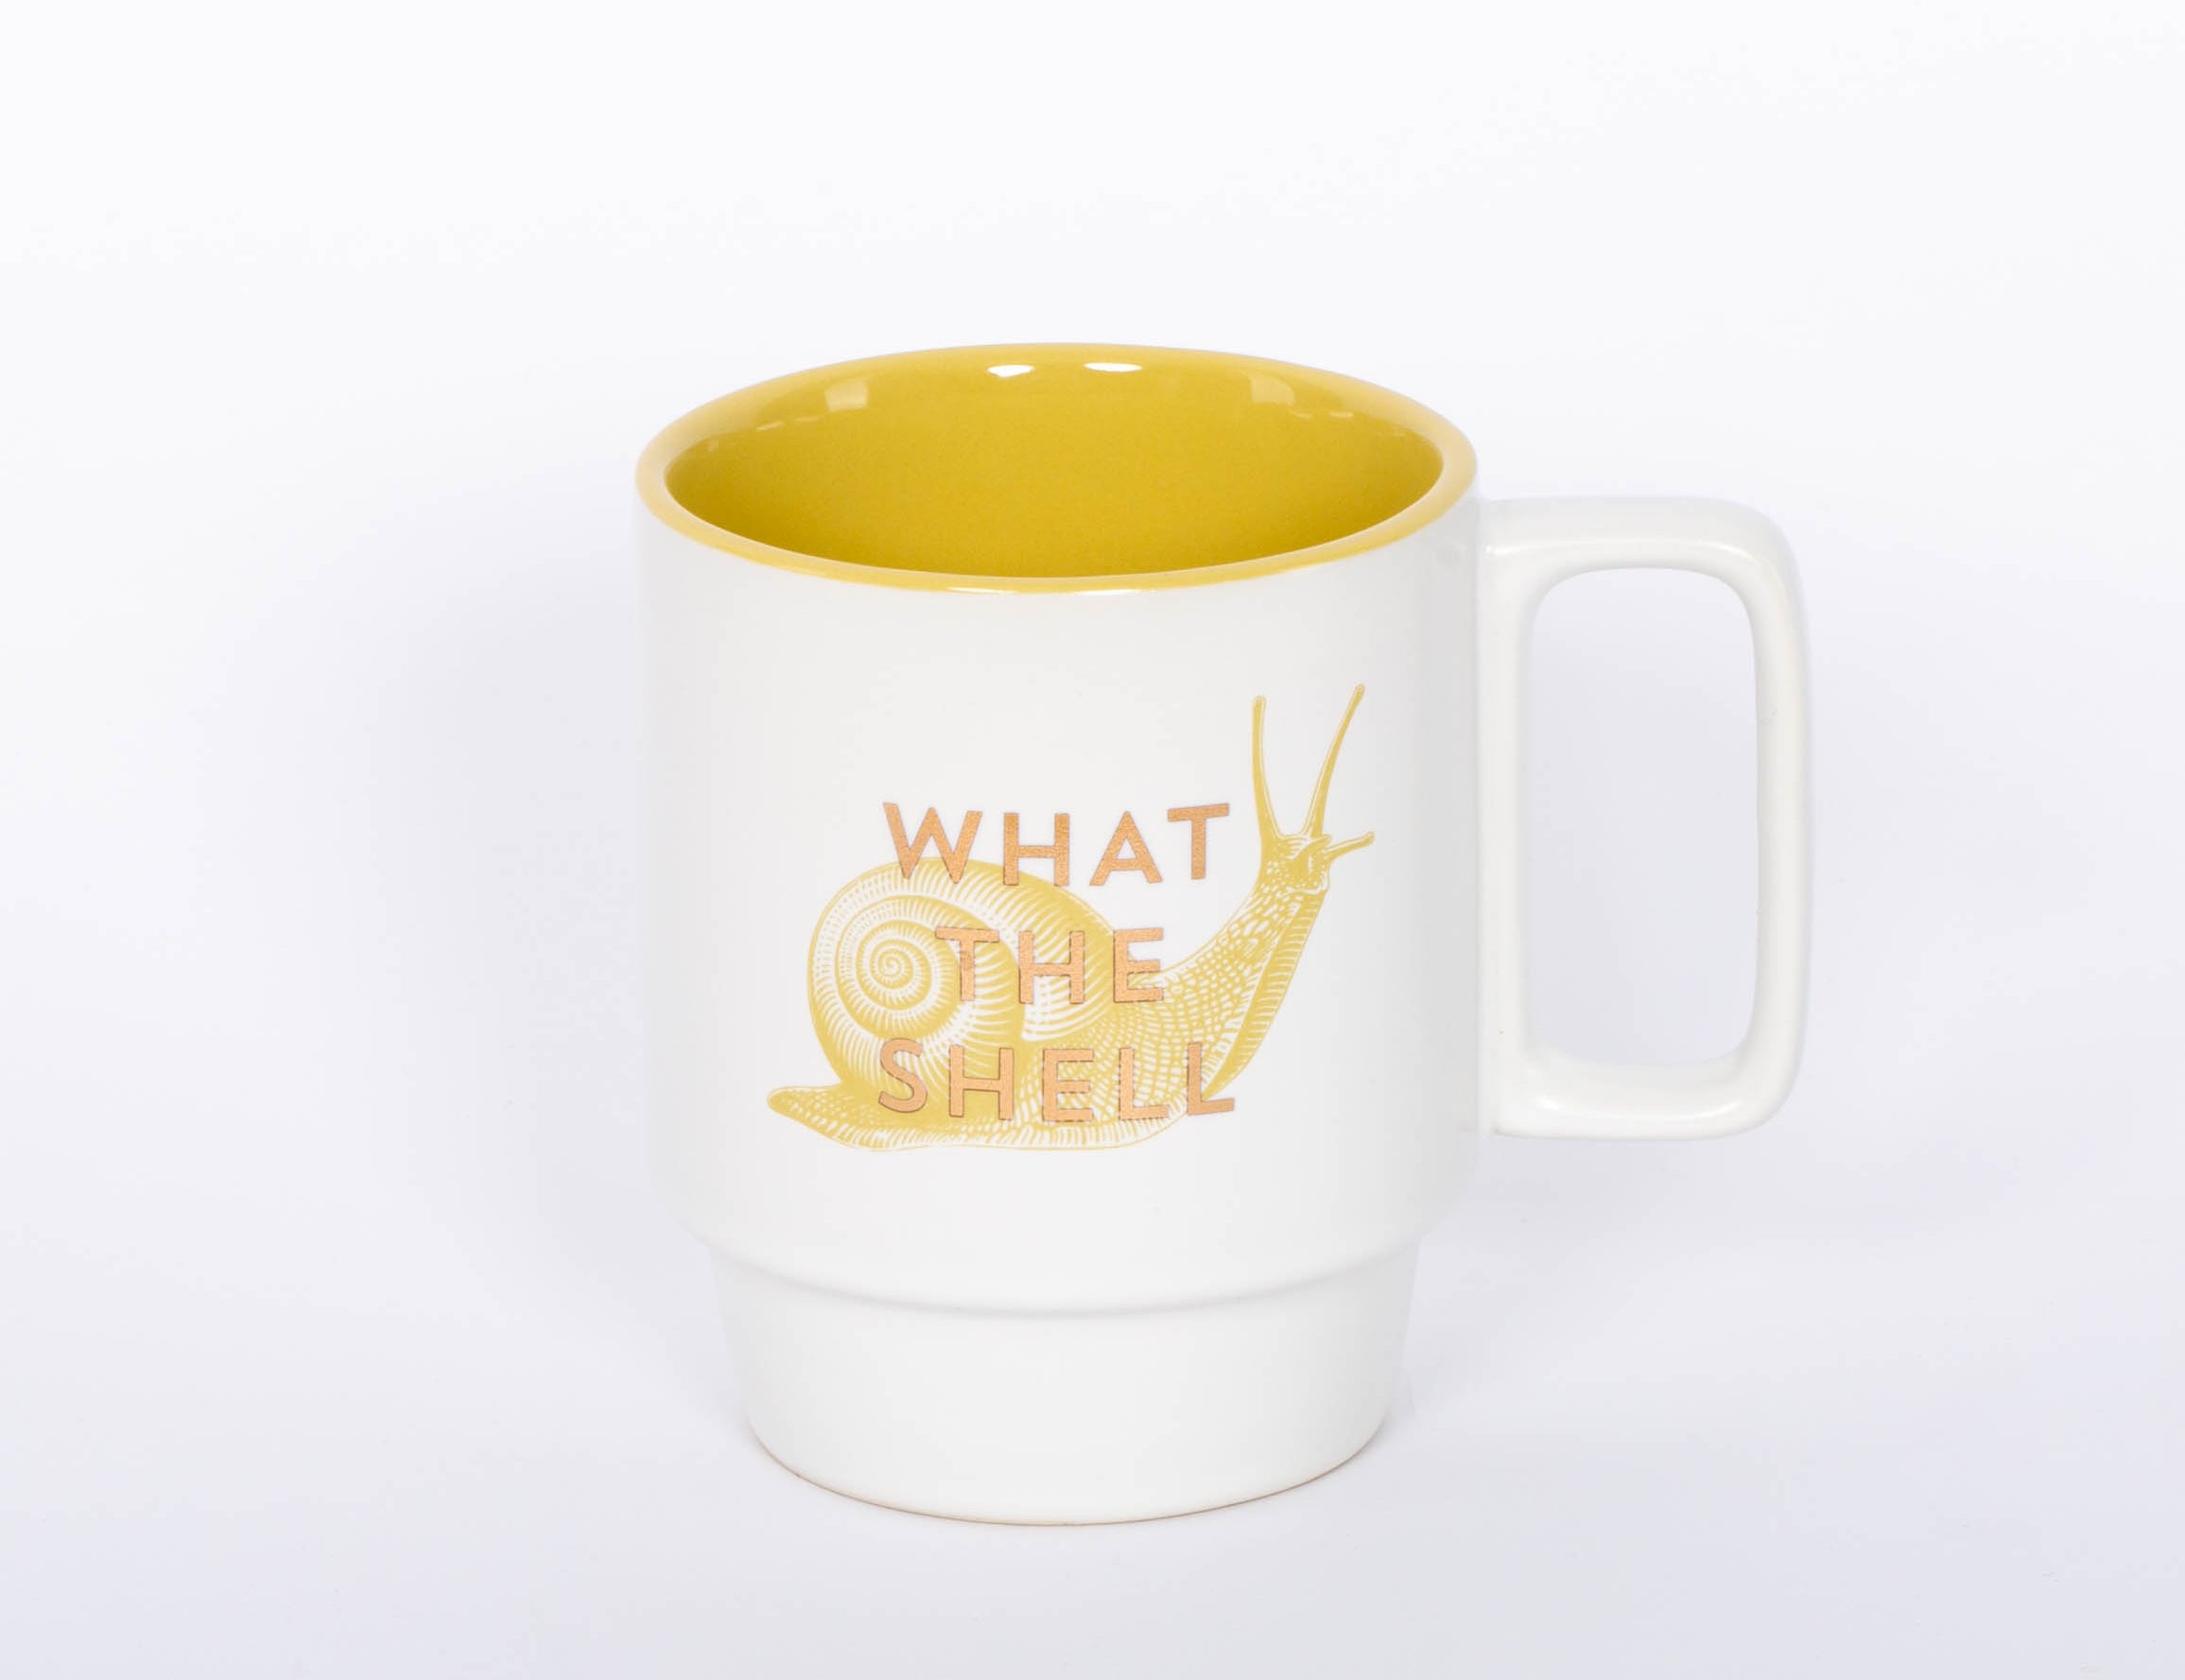 What the Shell Mug. This 12 oz. snail mug is the perfect companion to your morning routine whether it's for a cup of coffee, hot cocoa, or tea. It also makes a great gift for the witty friend or family member in your life!  3.25" D X 4.125" H 12 Oz Stackable Ceramic Mug Cute Snail Illustration Metallic Gold Foil Accent